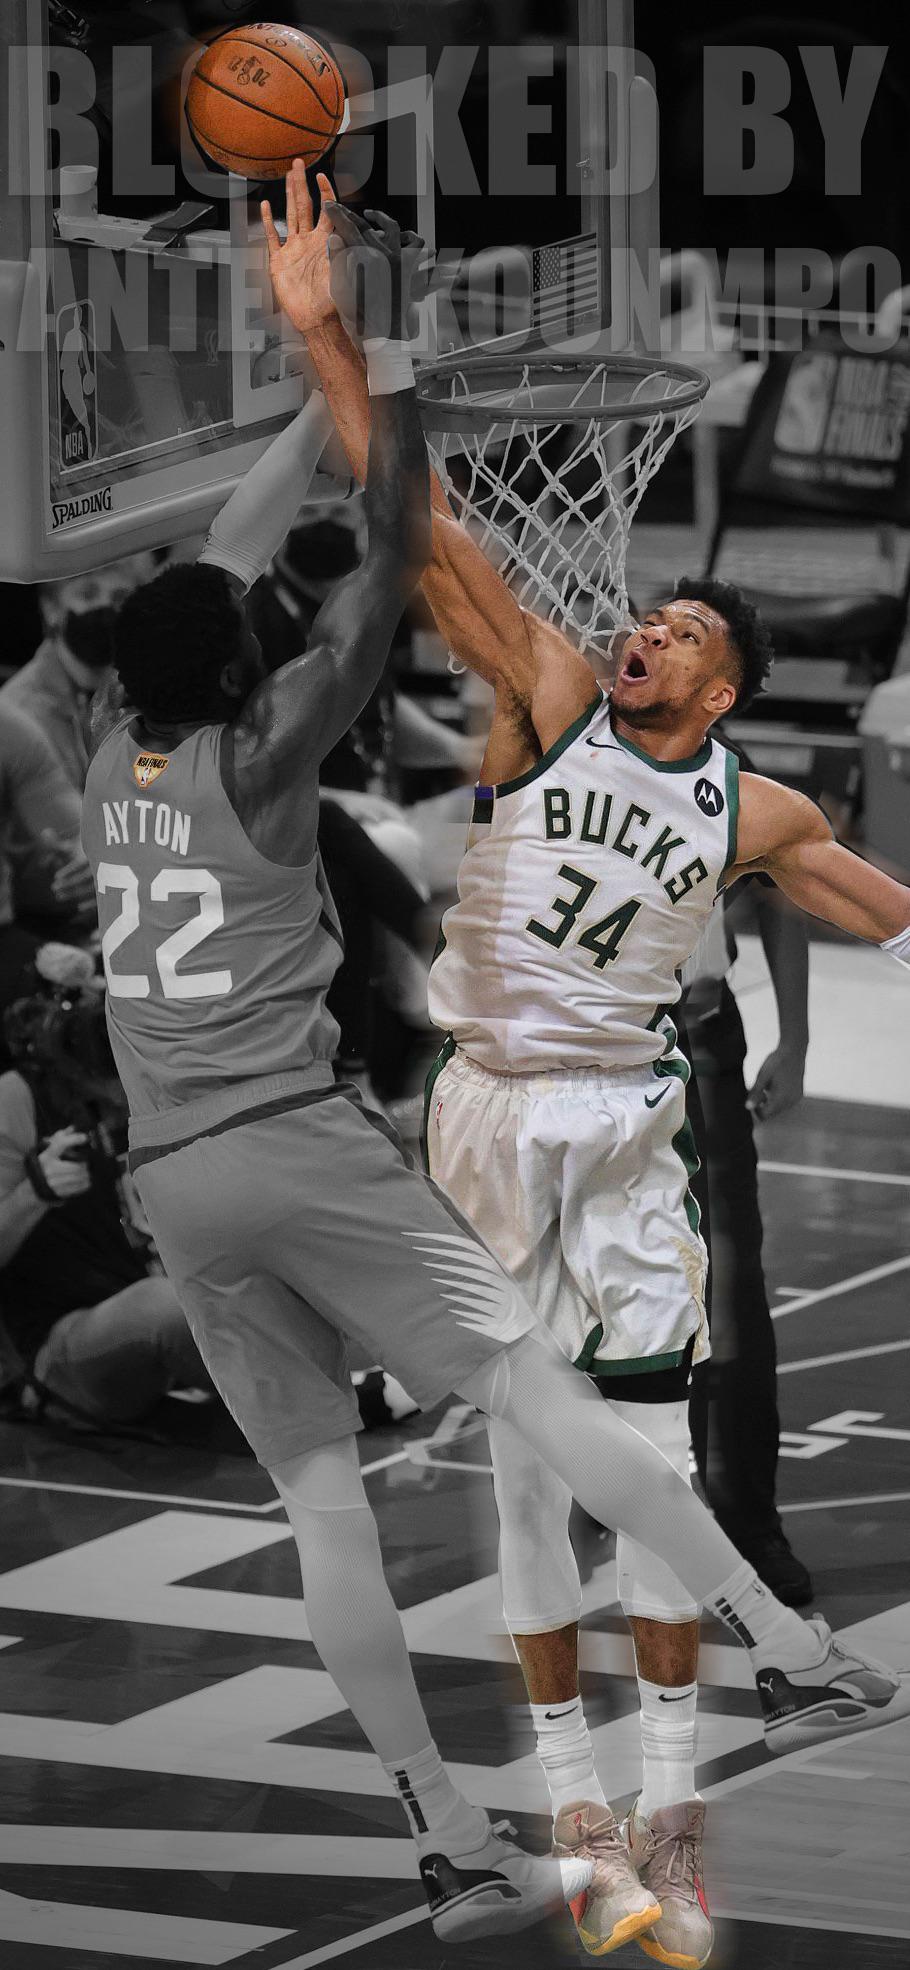 Made a IPhone wallpaper from the best block in finals history! LFG bucks and bucks in 6!